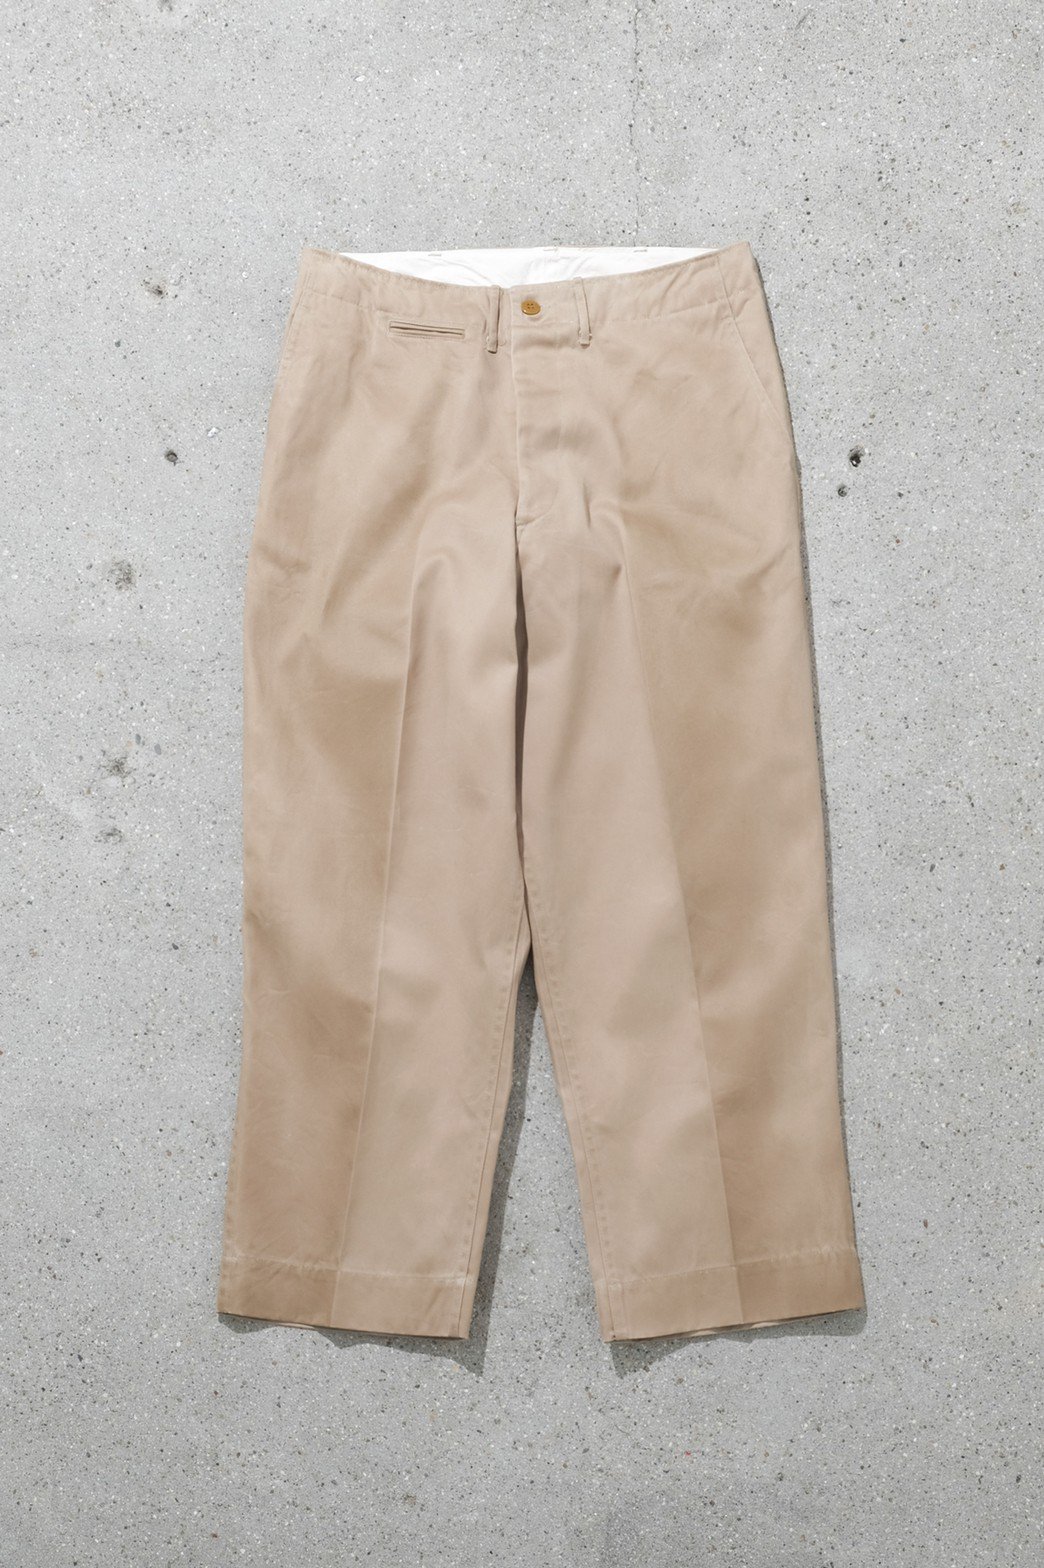 A.PRESSE / Vintage US ARMY Chino Trousers